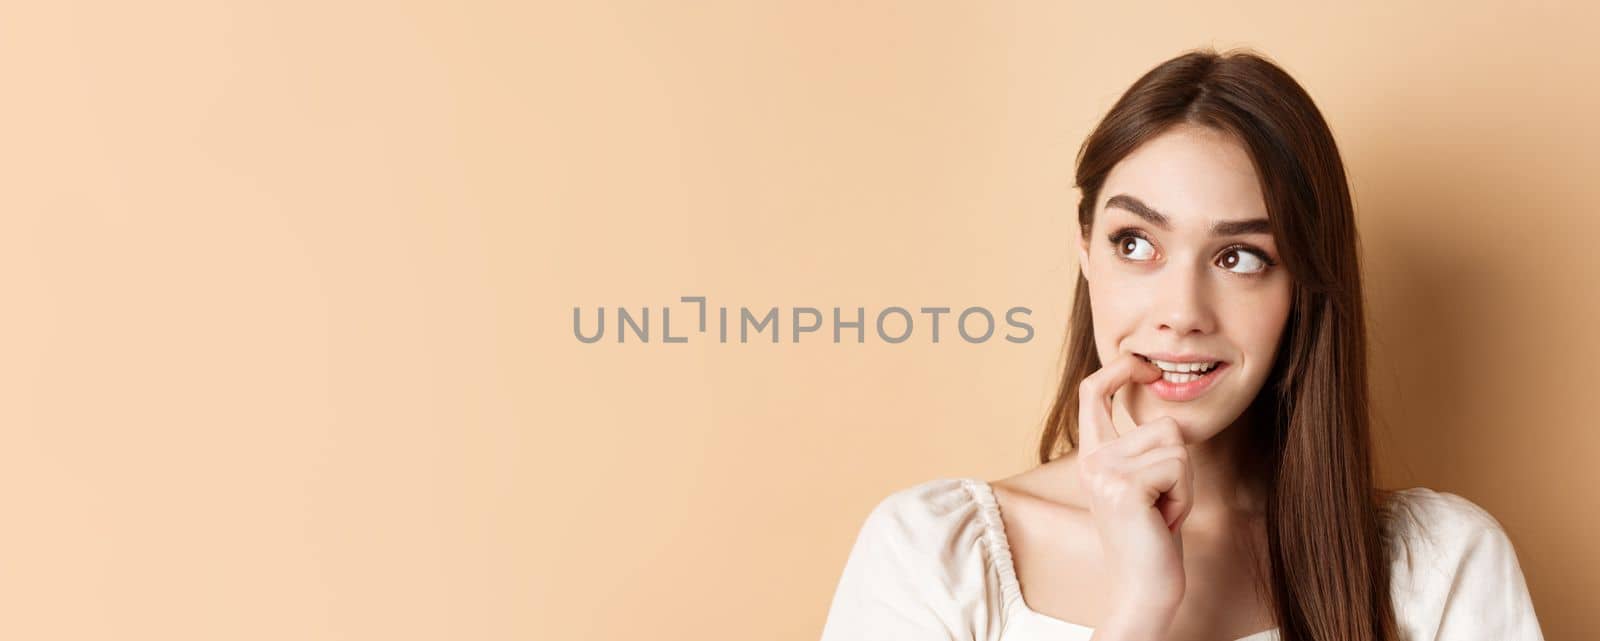 Close up of cute young woman thinking, biting fingernail and look tempted aside, staring at logo with desire, standing on beige background.